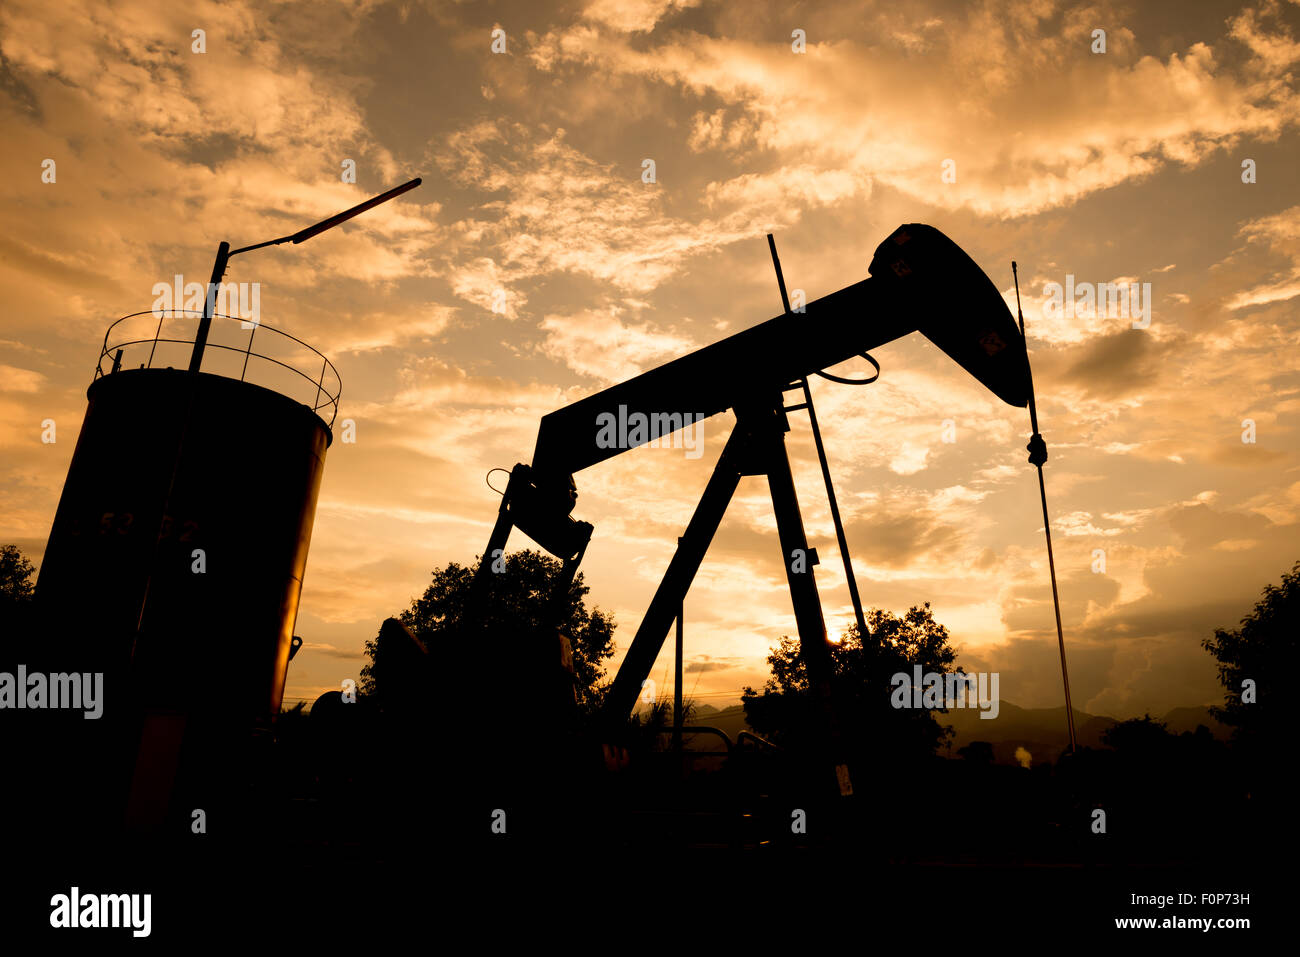 old pumpjack pumping crude oil from oil well Stock Photo